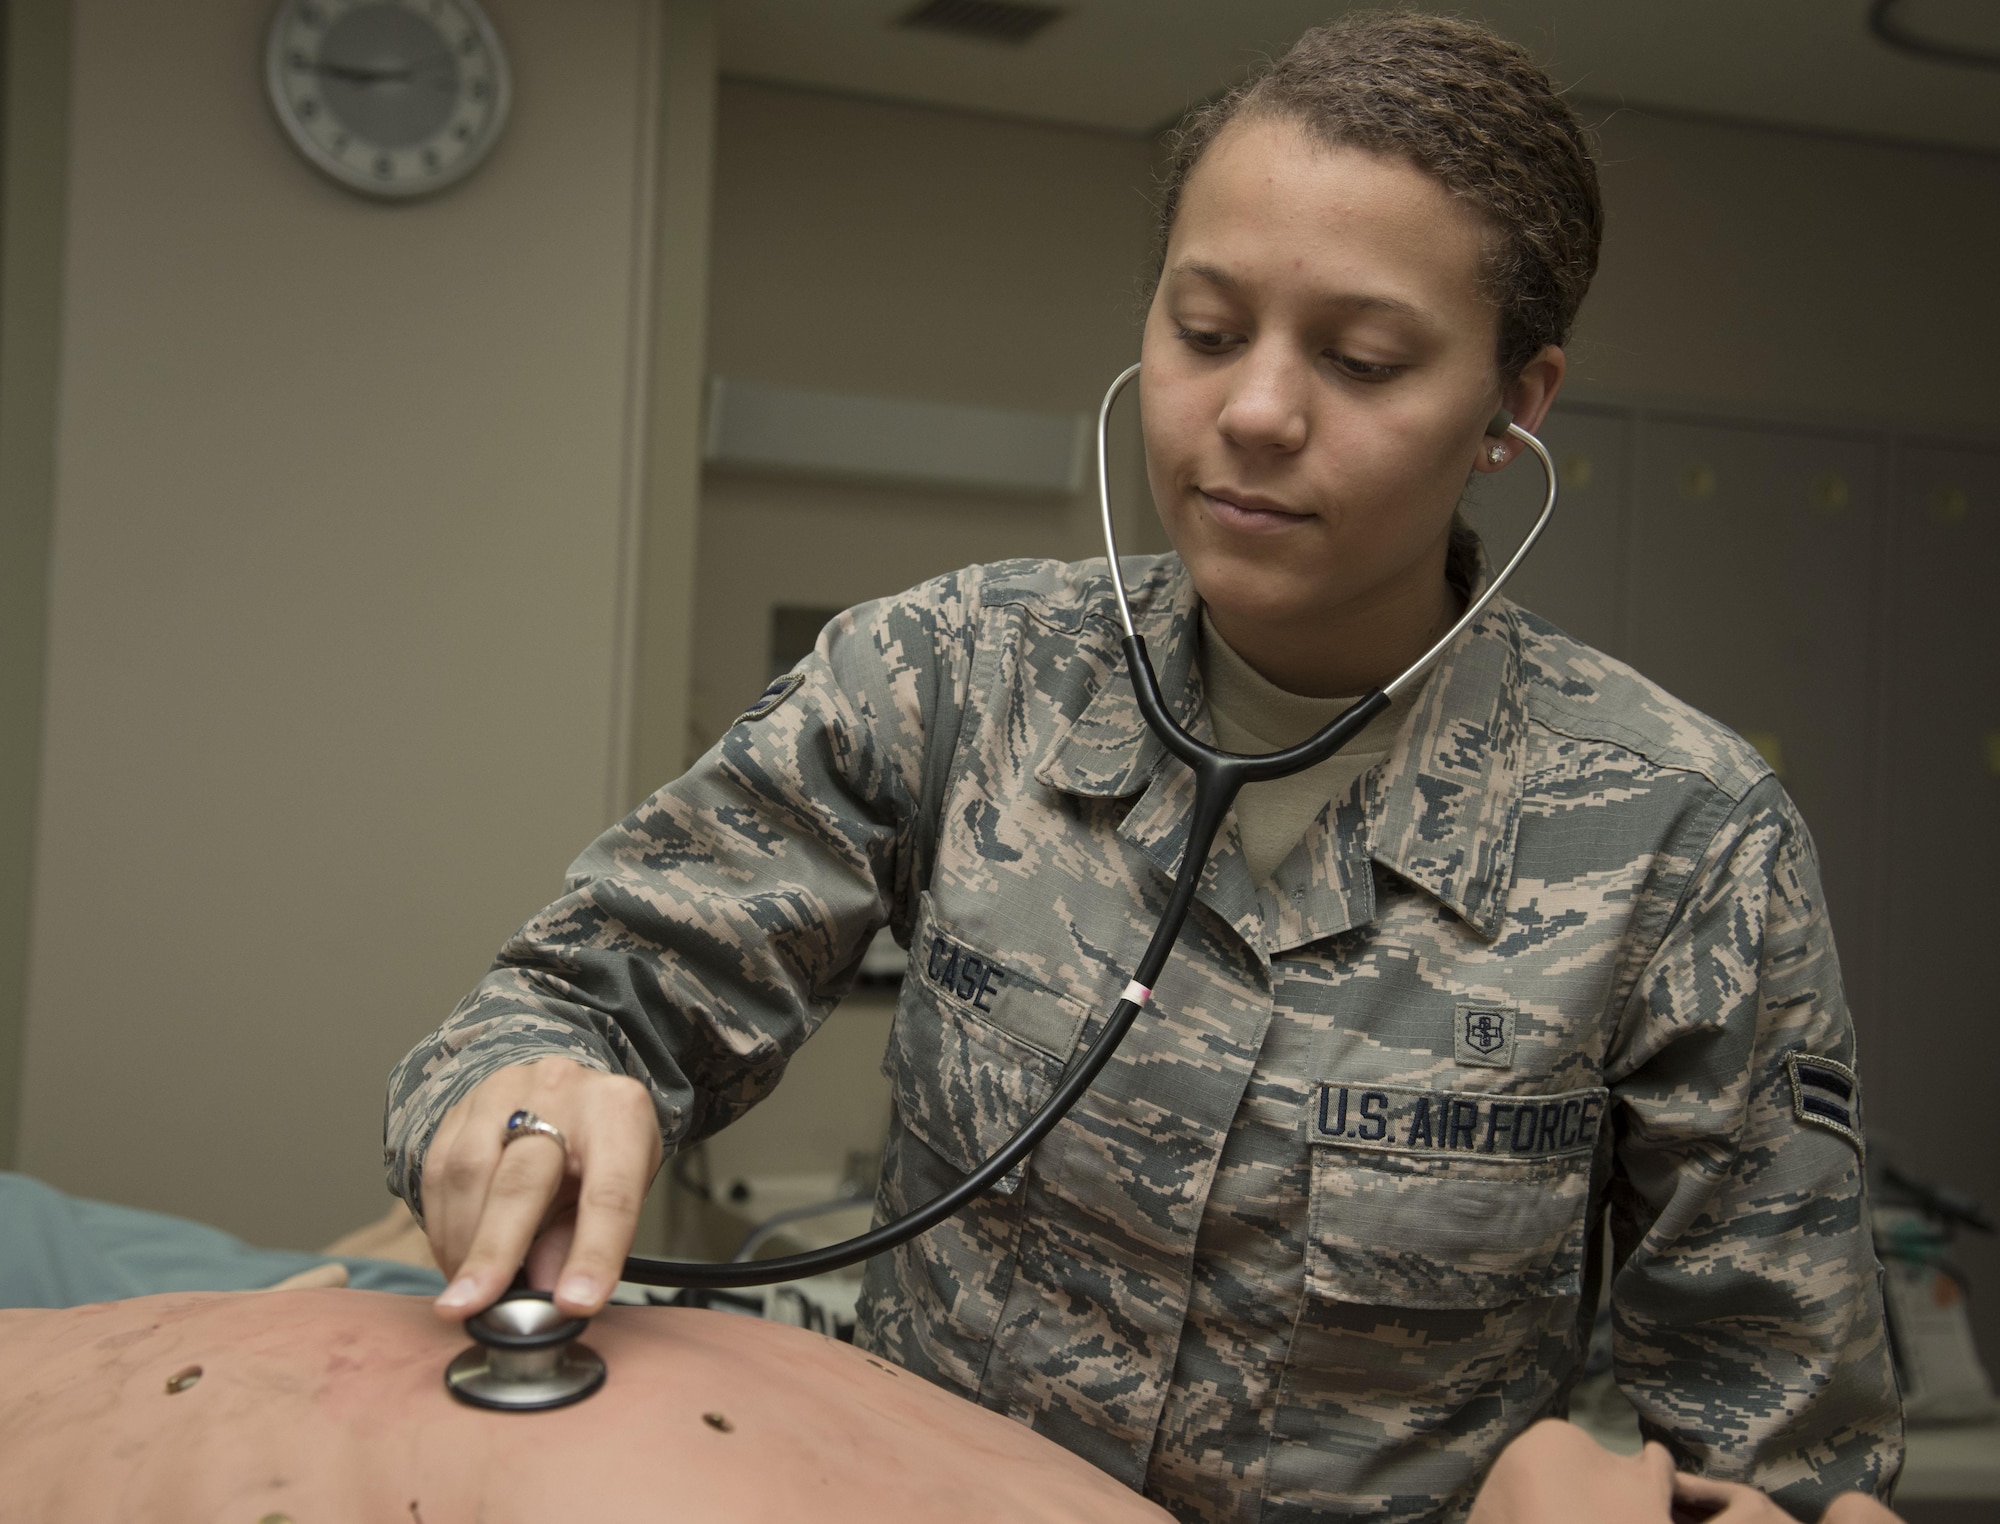 U.S. Air Force Airman 1st Class Dominique Case, a 35th Medical Operations Squadron aerospace medical technician, uses a stethoscope to listen to a mannequin’s heartbeat at Misawa Air Base, Japan, Feb. 3, 2017. The training focused on responding to a collapsed patient with an automated external defibrillator. (U.S Air Force photo by Airman 1st Class Sadie Colbert)